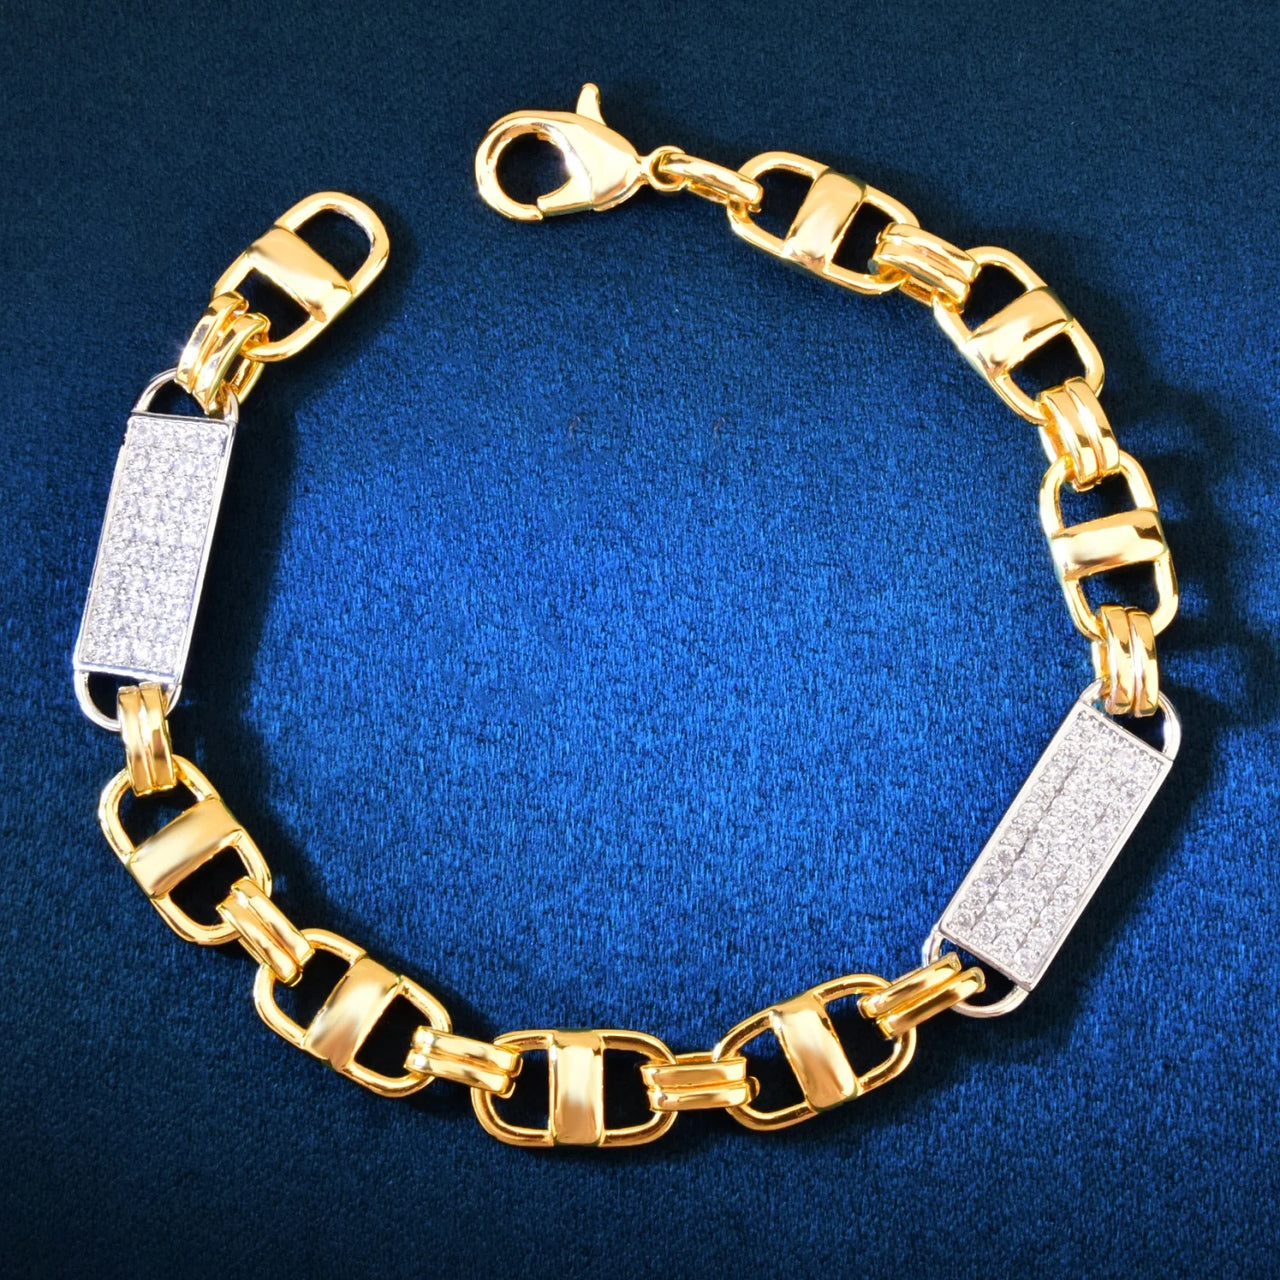 8mm Iced Tag Link Bracelet - Different Drips